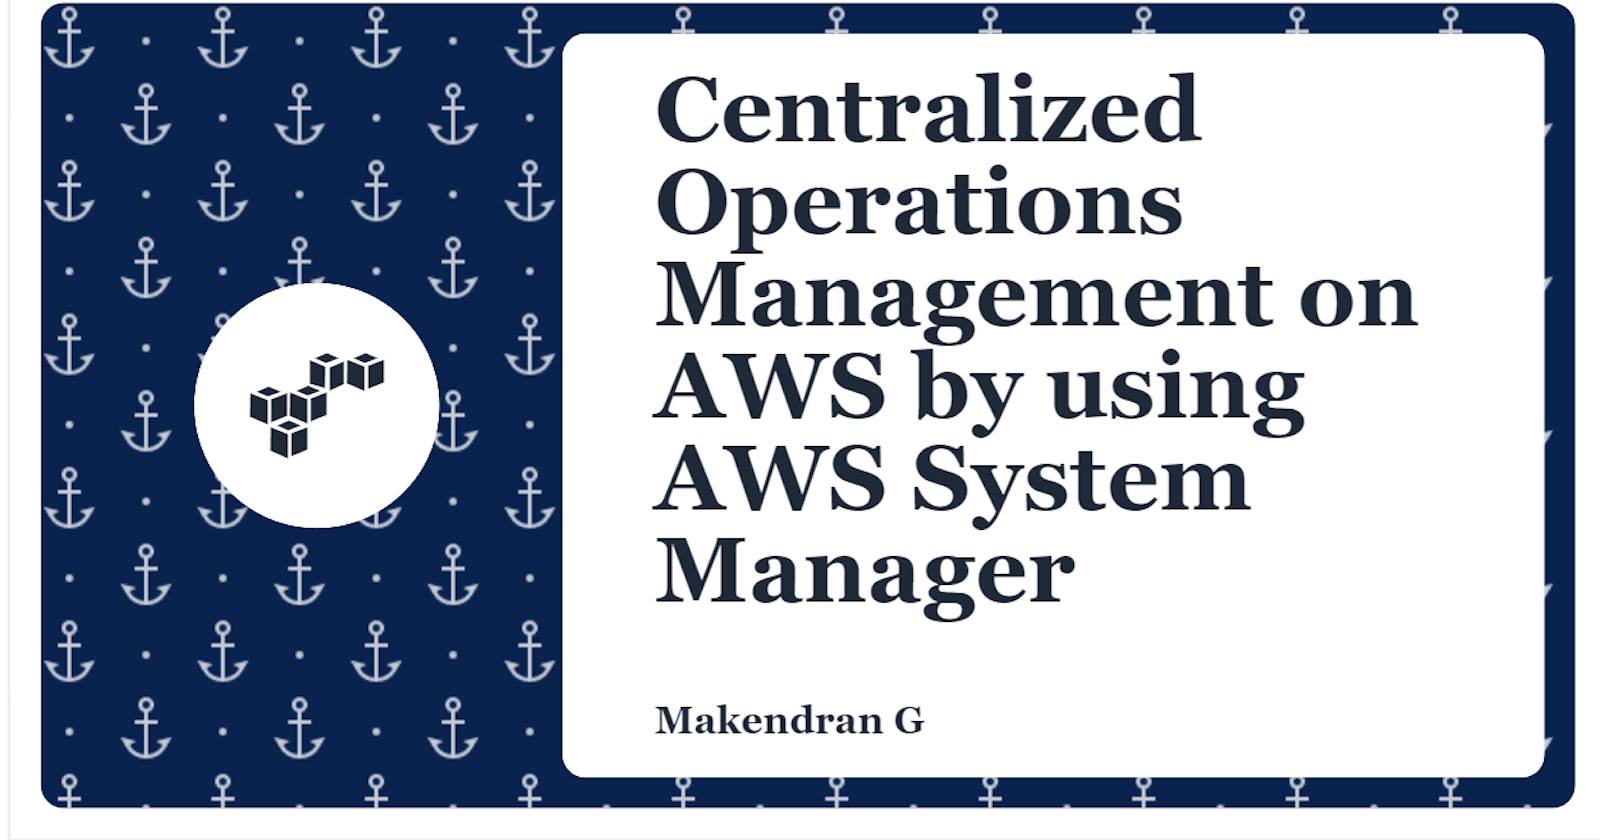 Centralized Operations Management on AWS by using AWS System Manager